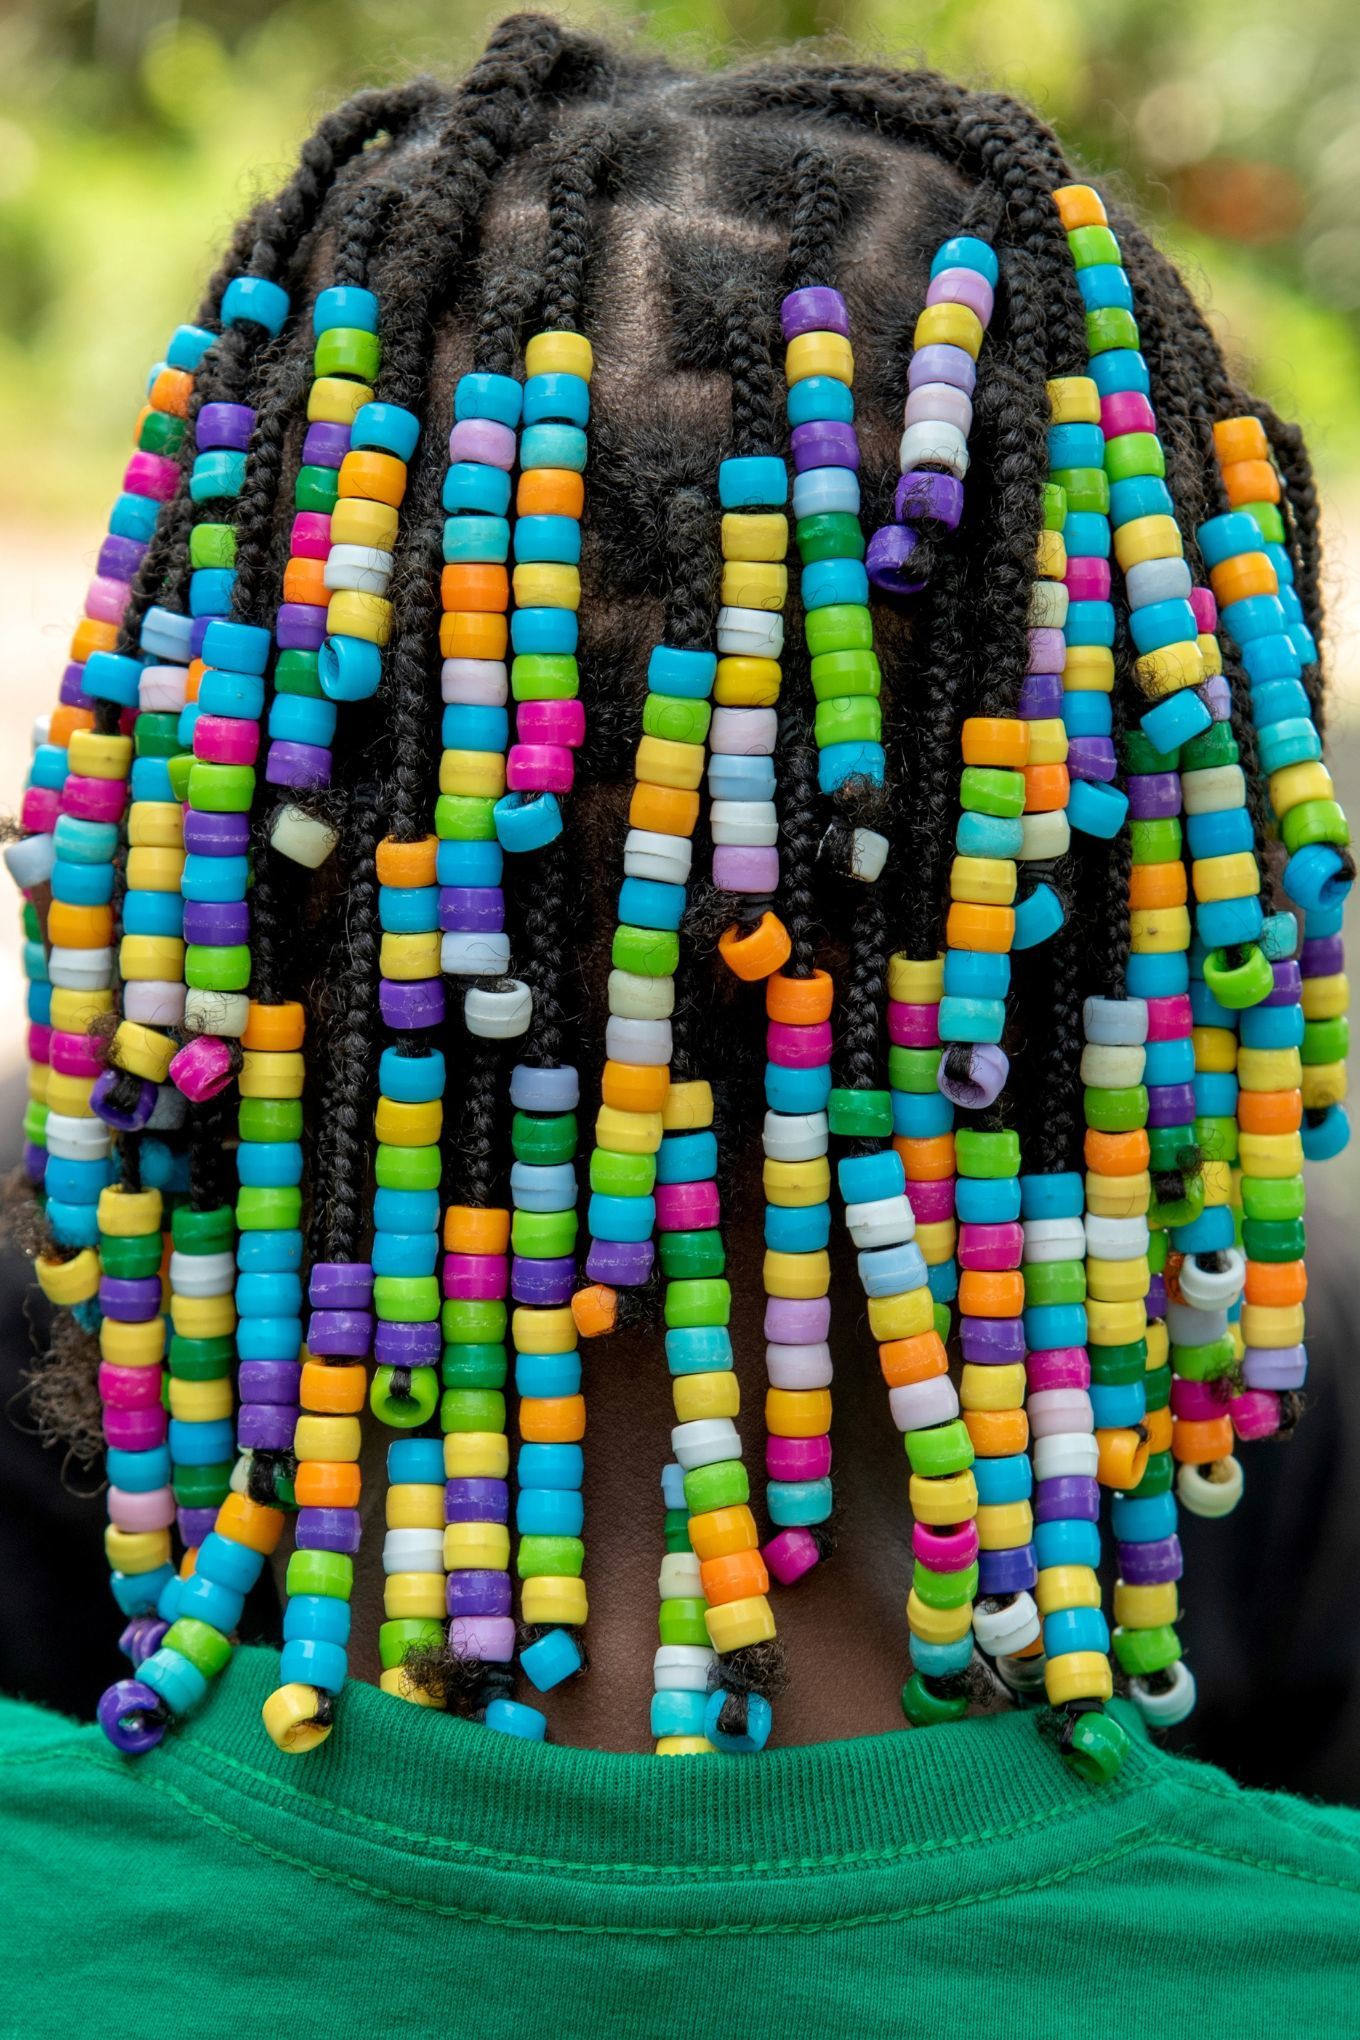 How to Add Beads to Braids